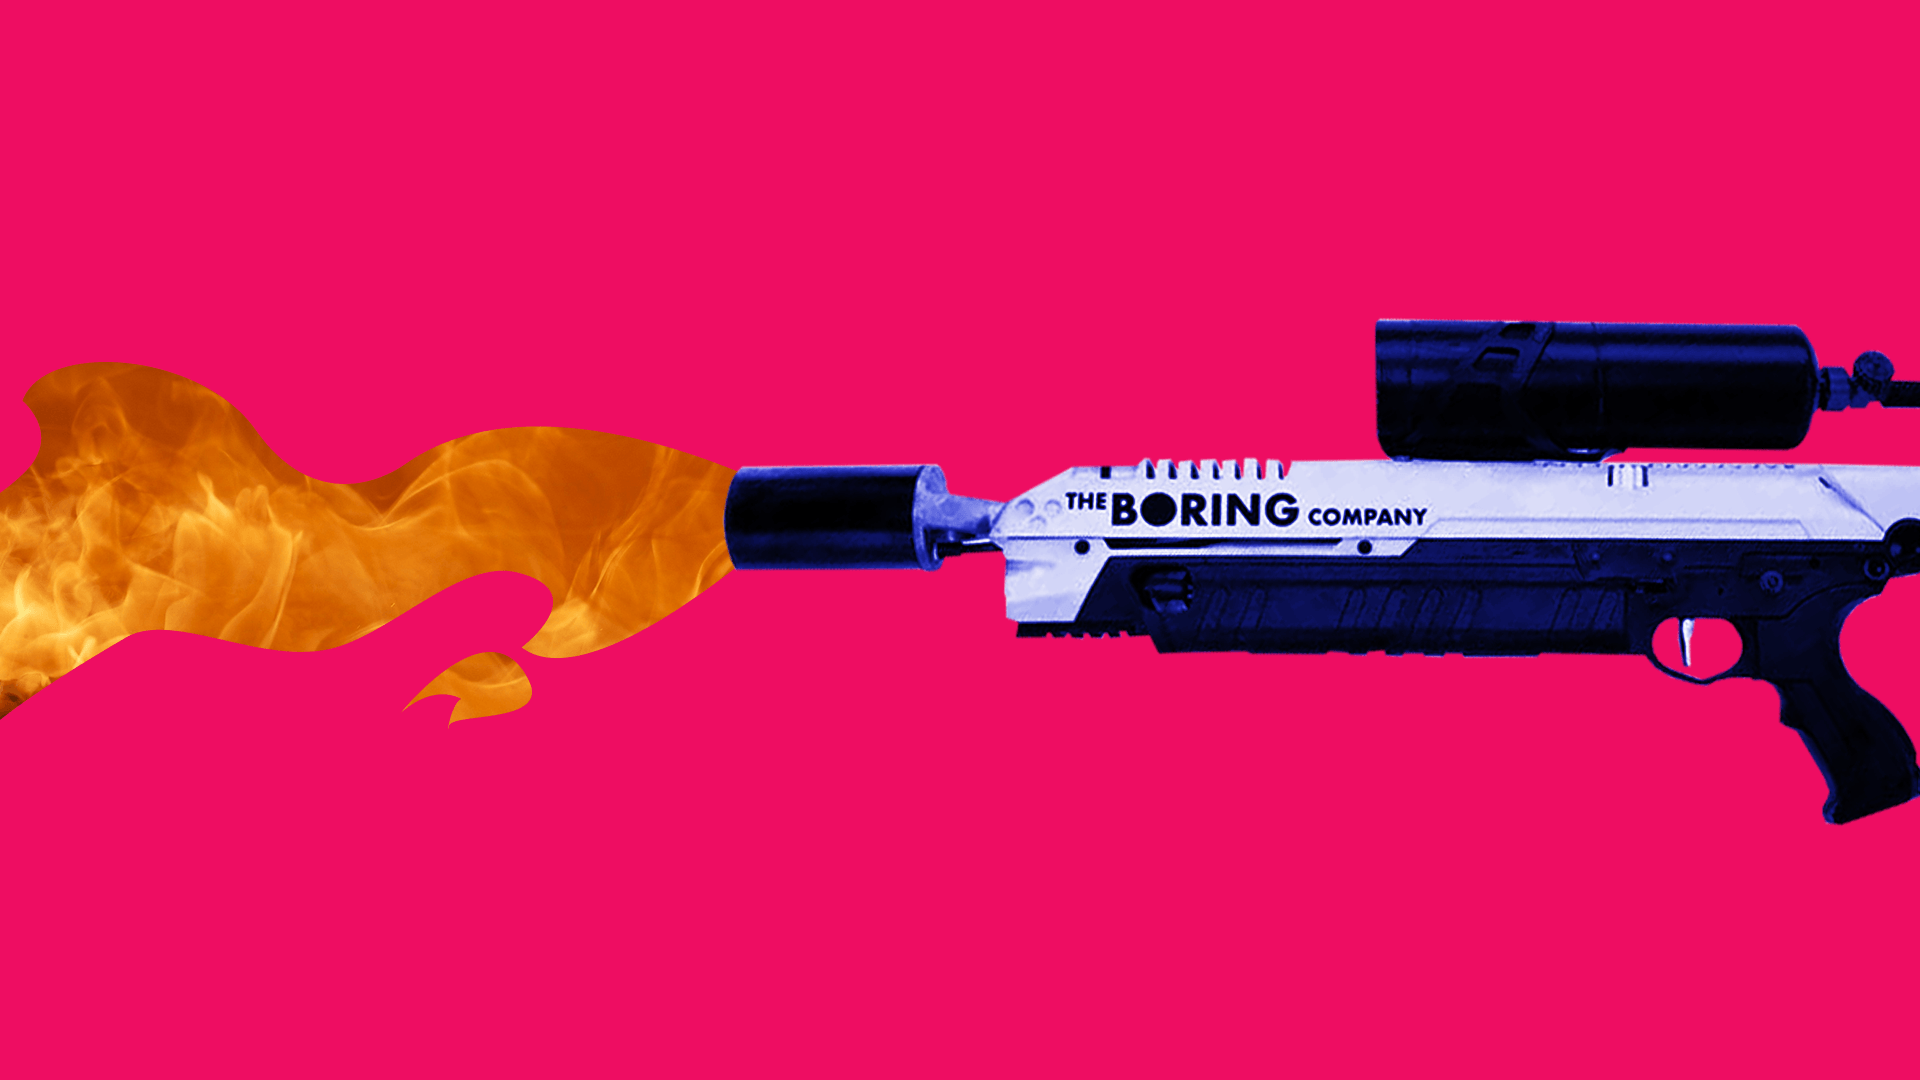 Boring Company Flamethrowers Are Here and Already Being Used